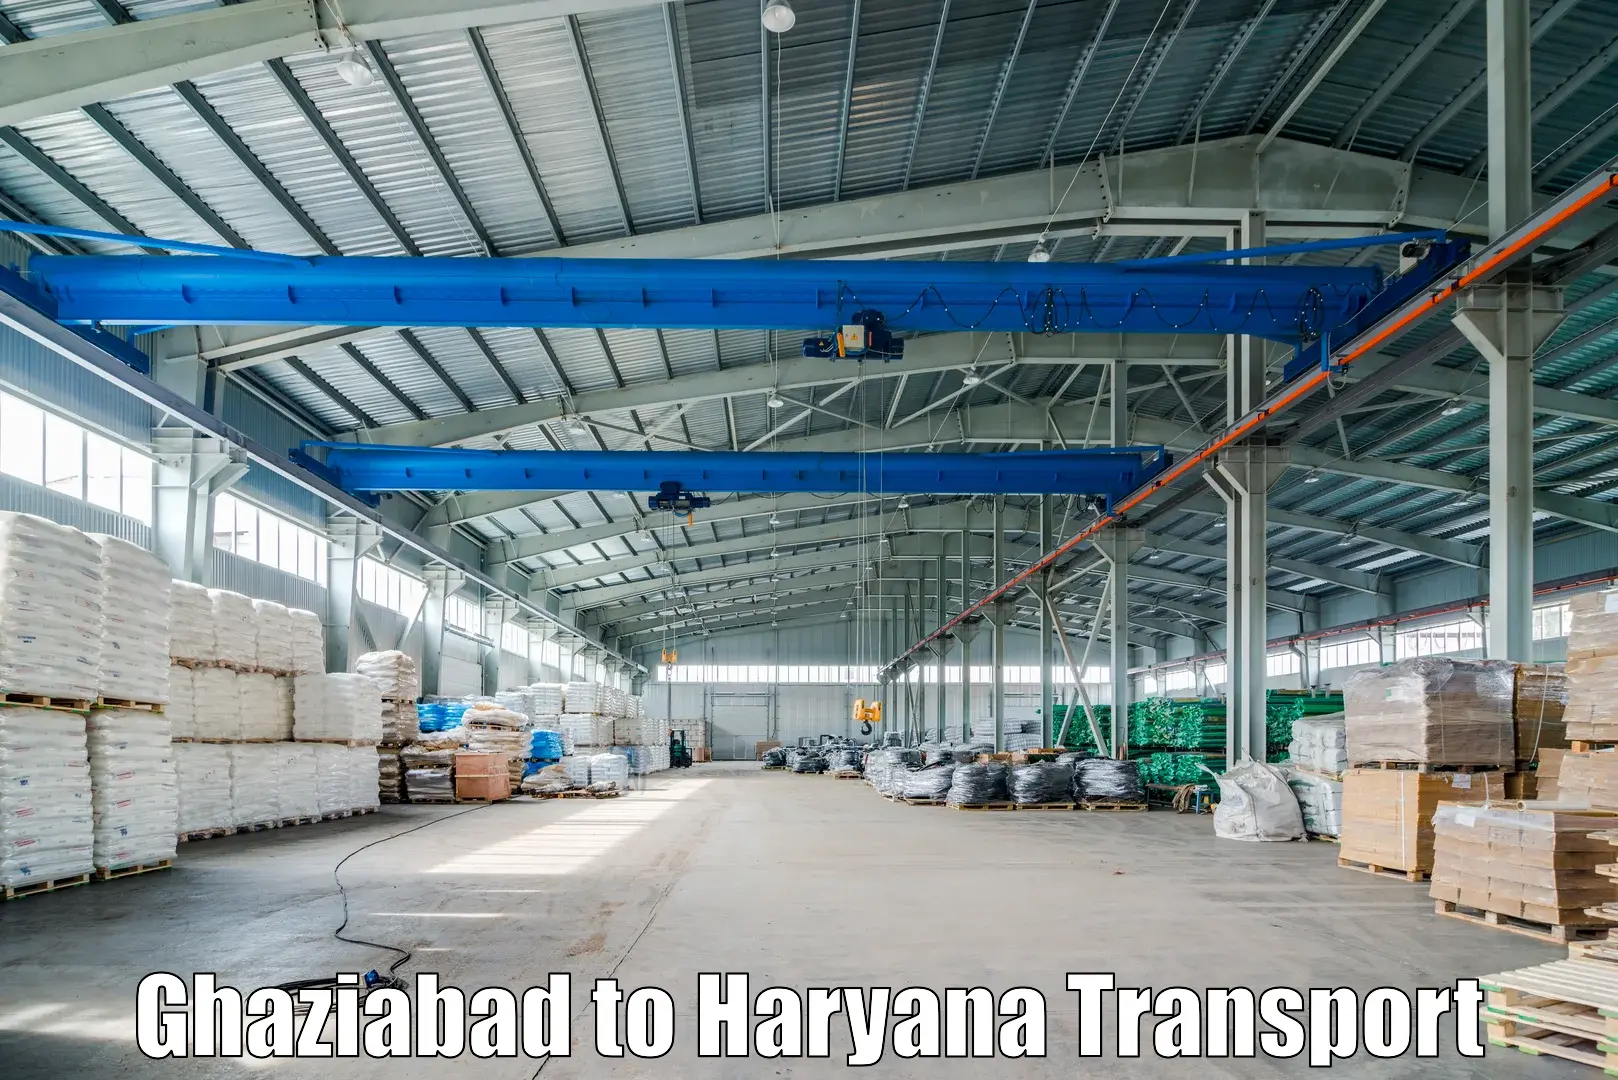 Land transport services Ghaziabad to Rohtak